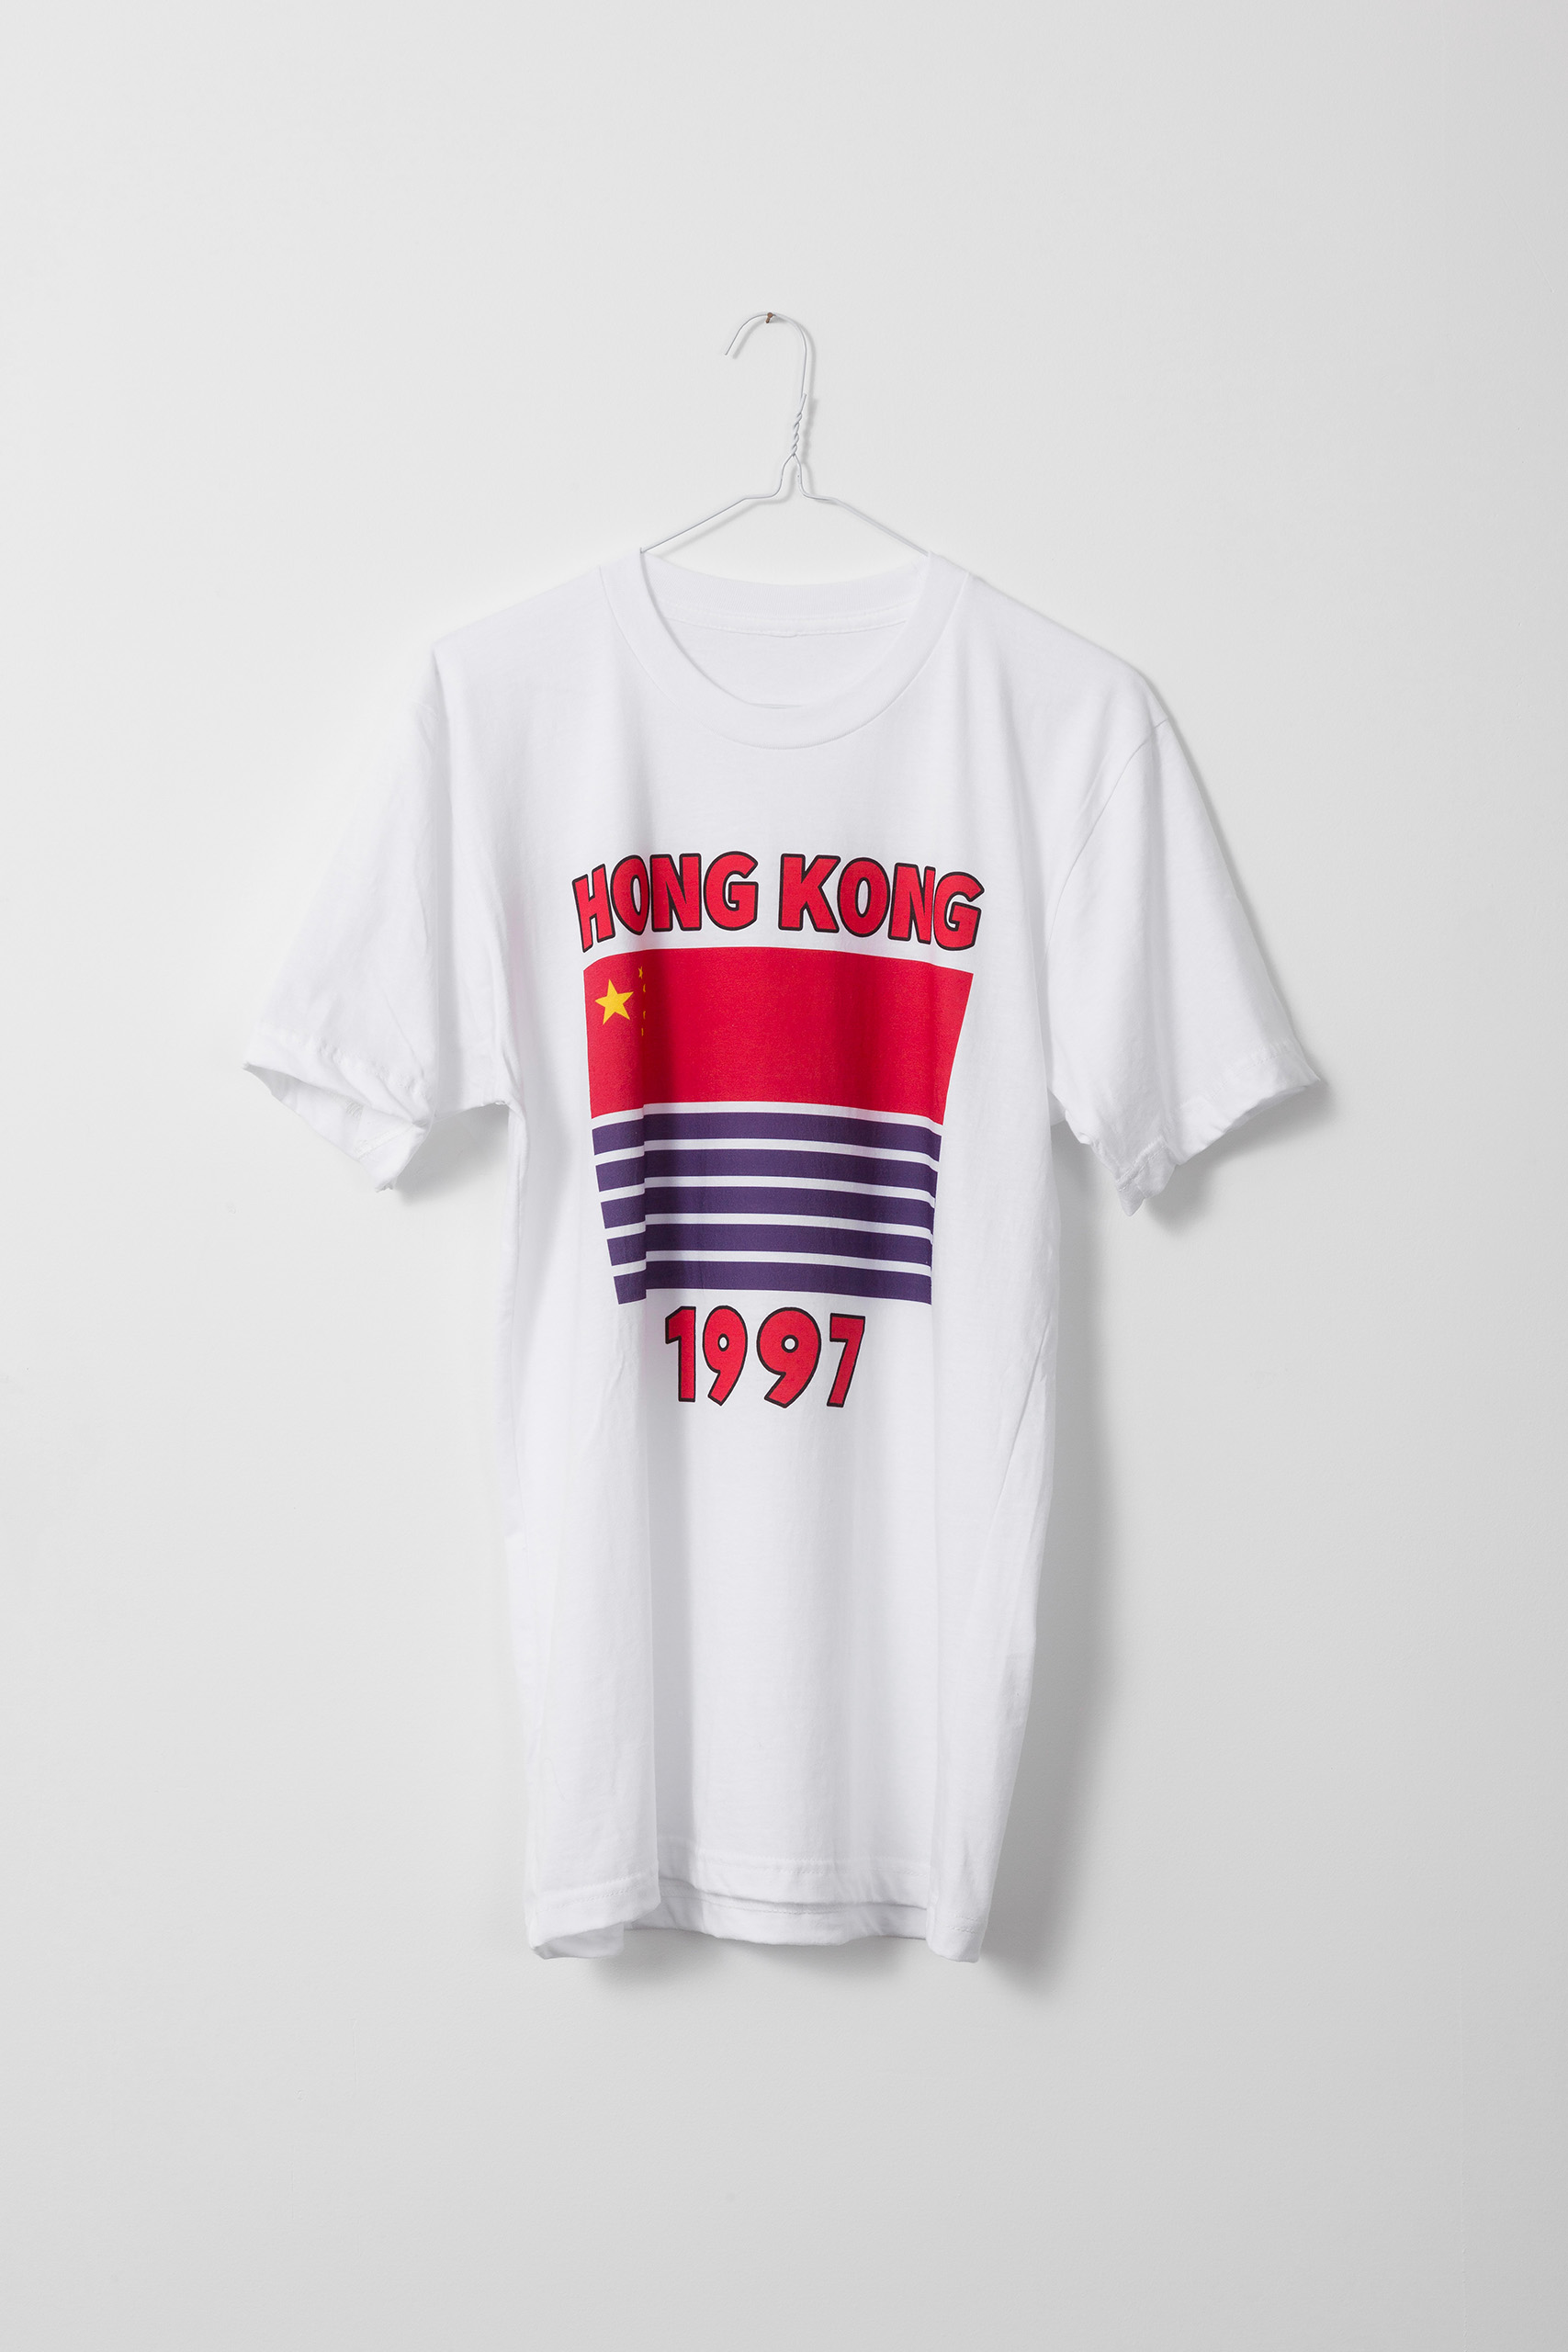 White t-shirt with a half red, half blue and white striped flag and the words "HONG KONG" above and "1997" below